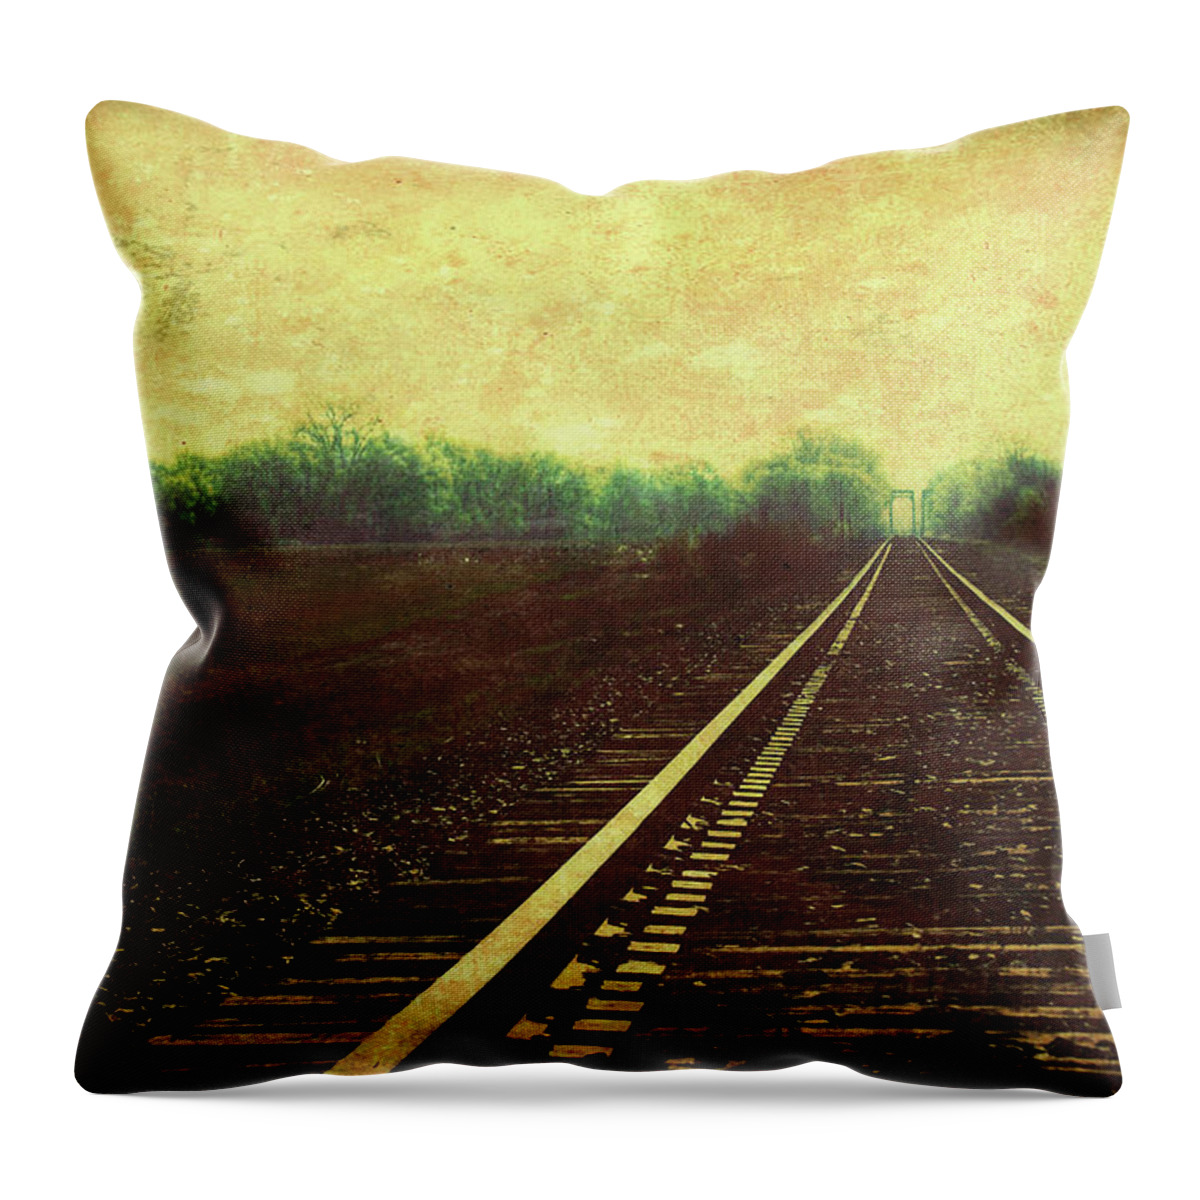 Railroad Track Glow Throw Pillow featuring the photograph Railroad Track Glow by Anna Louise